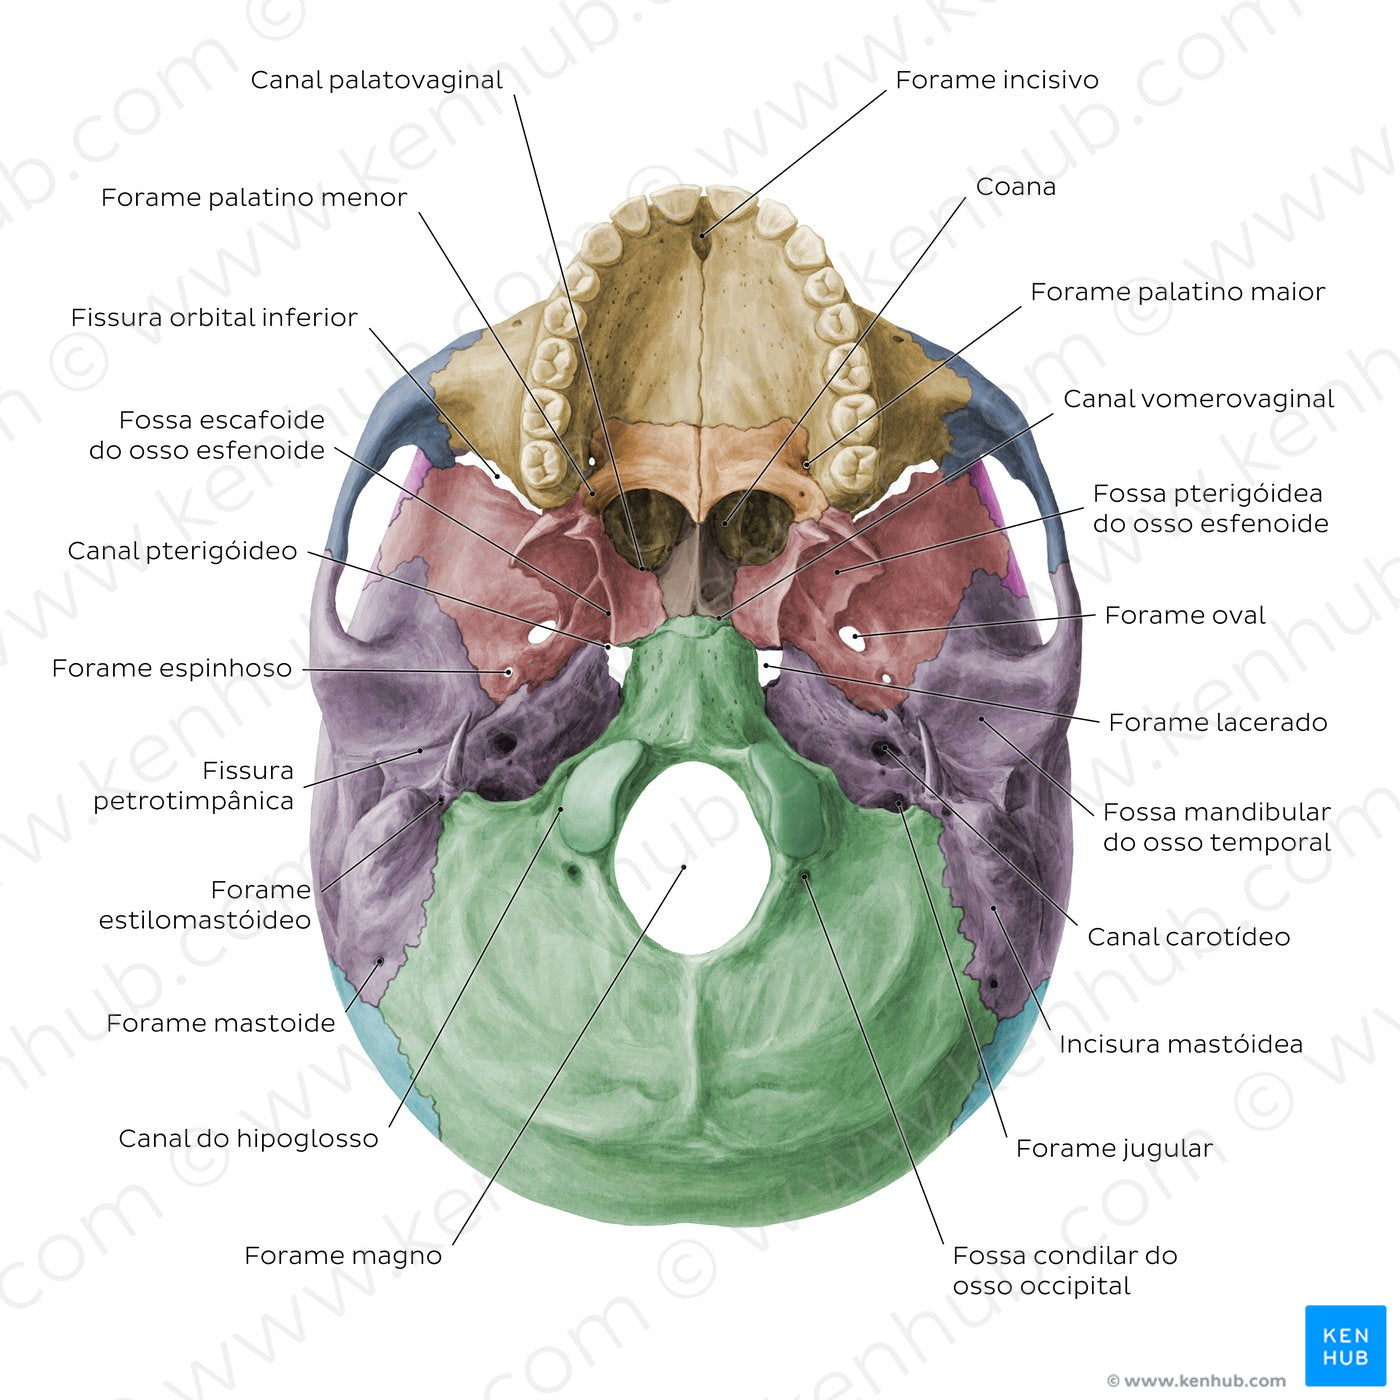 Inferior base of the skull - Foramina, fissures, and canals - Colored (Portuguese)